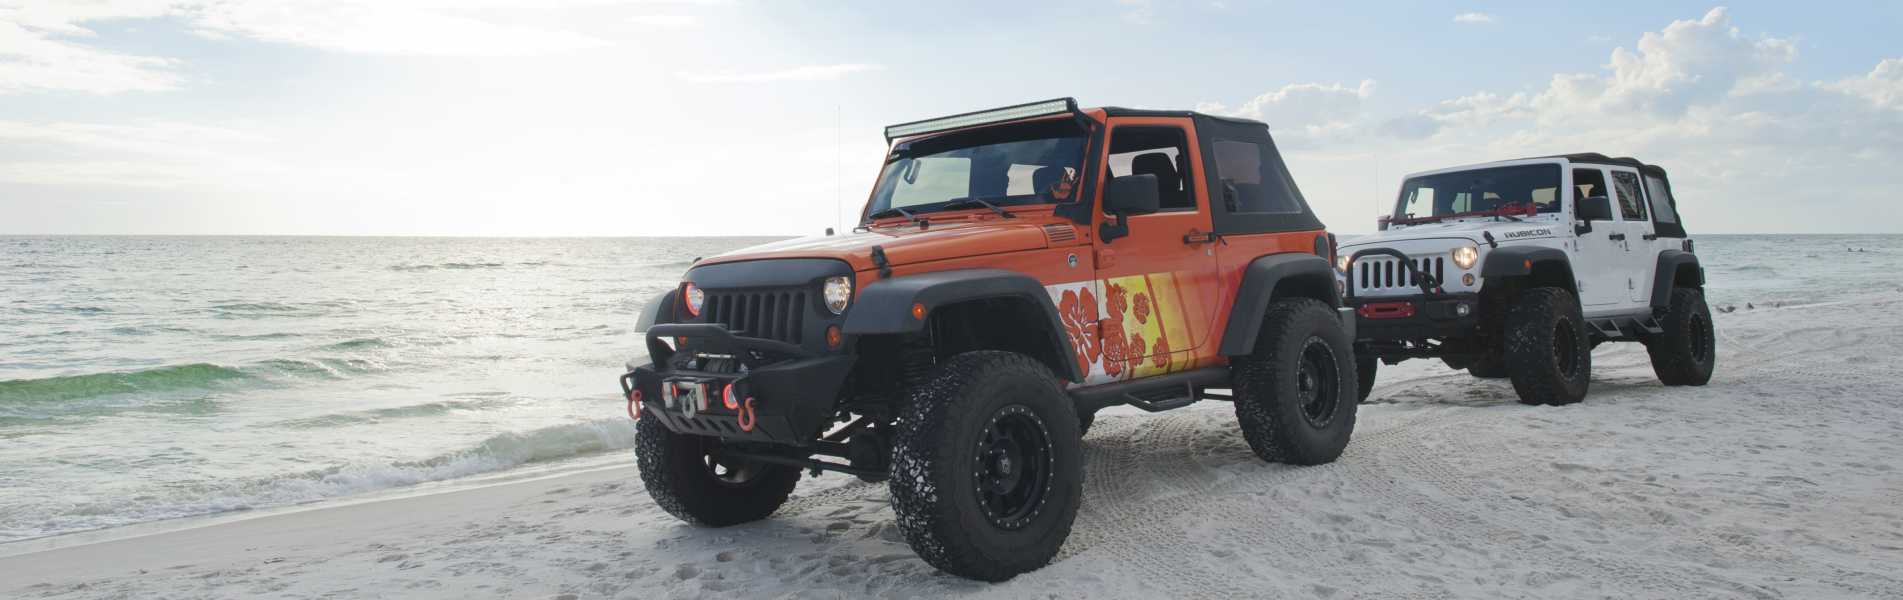 Introduce 75+ images jeep week panama city beach 2023 In.thptnganamst